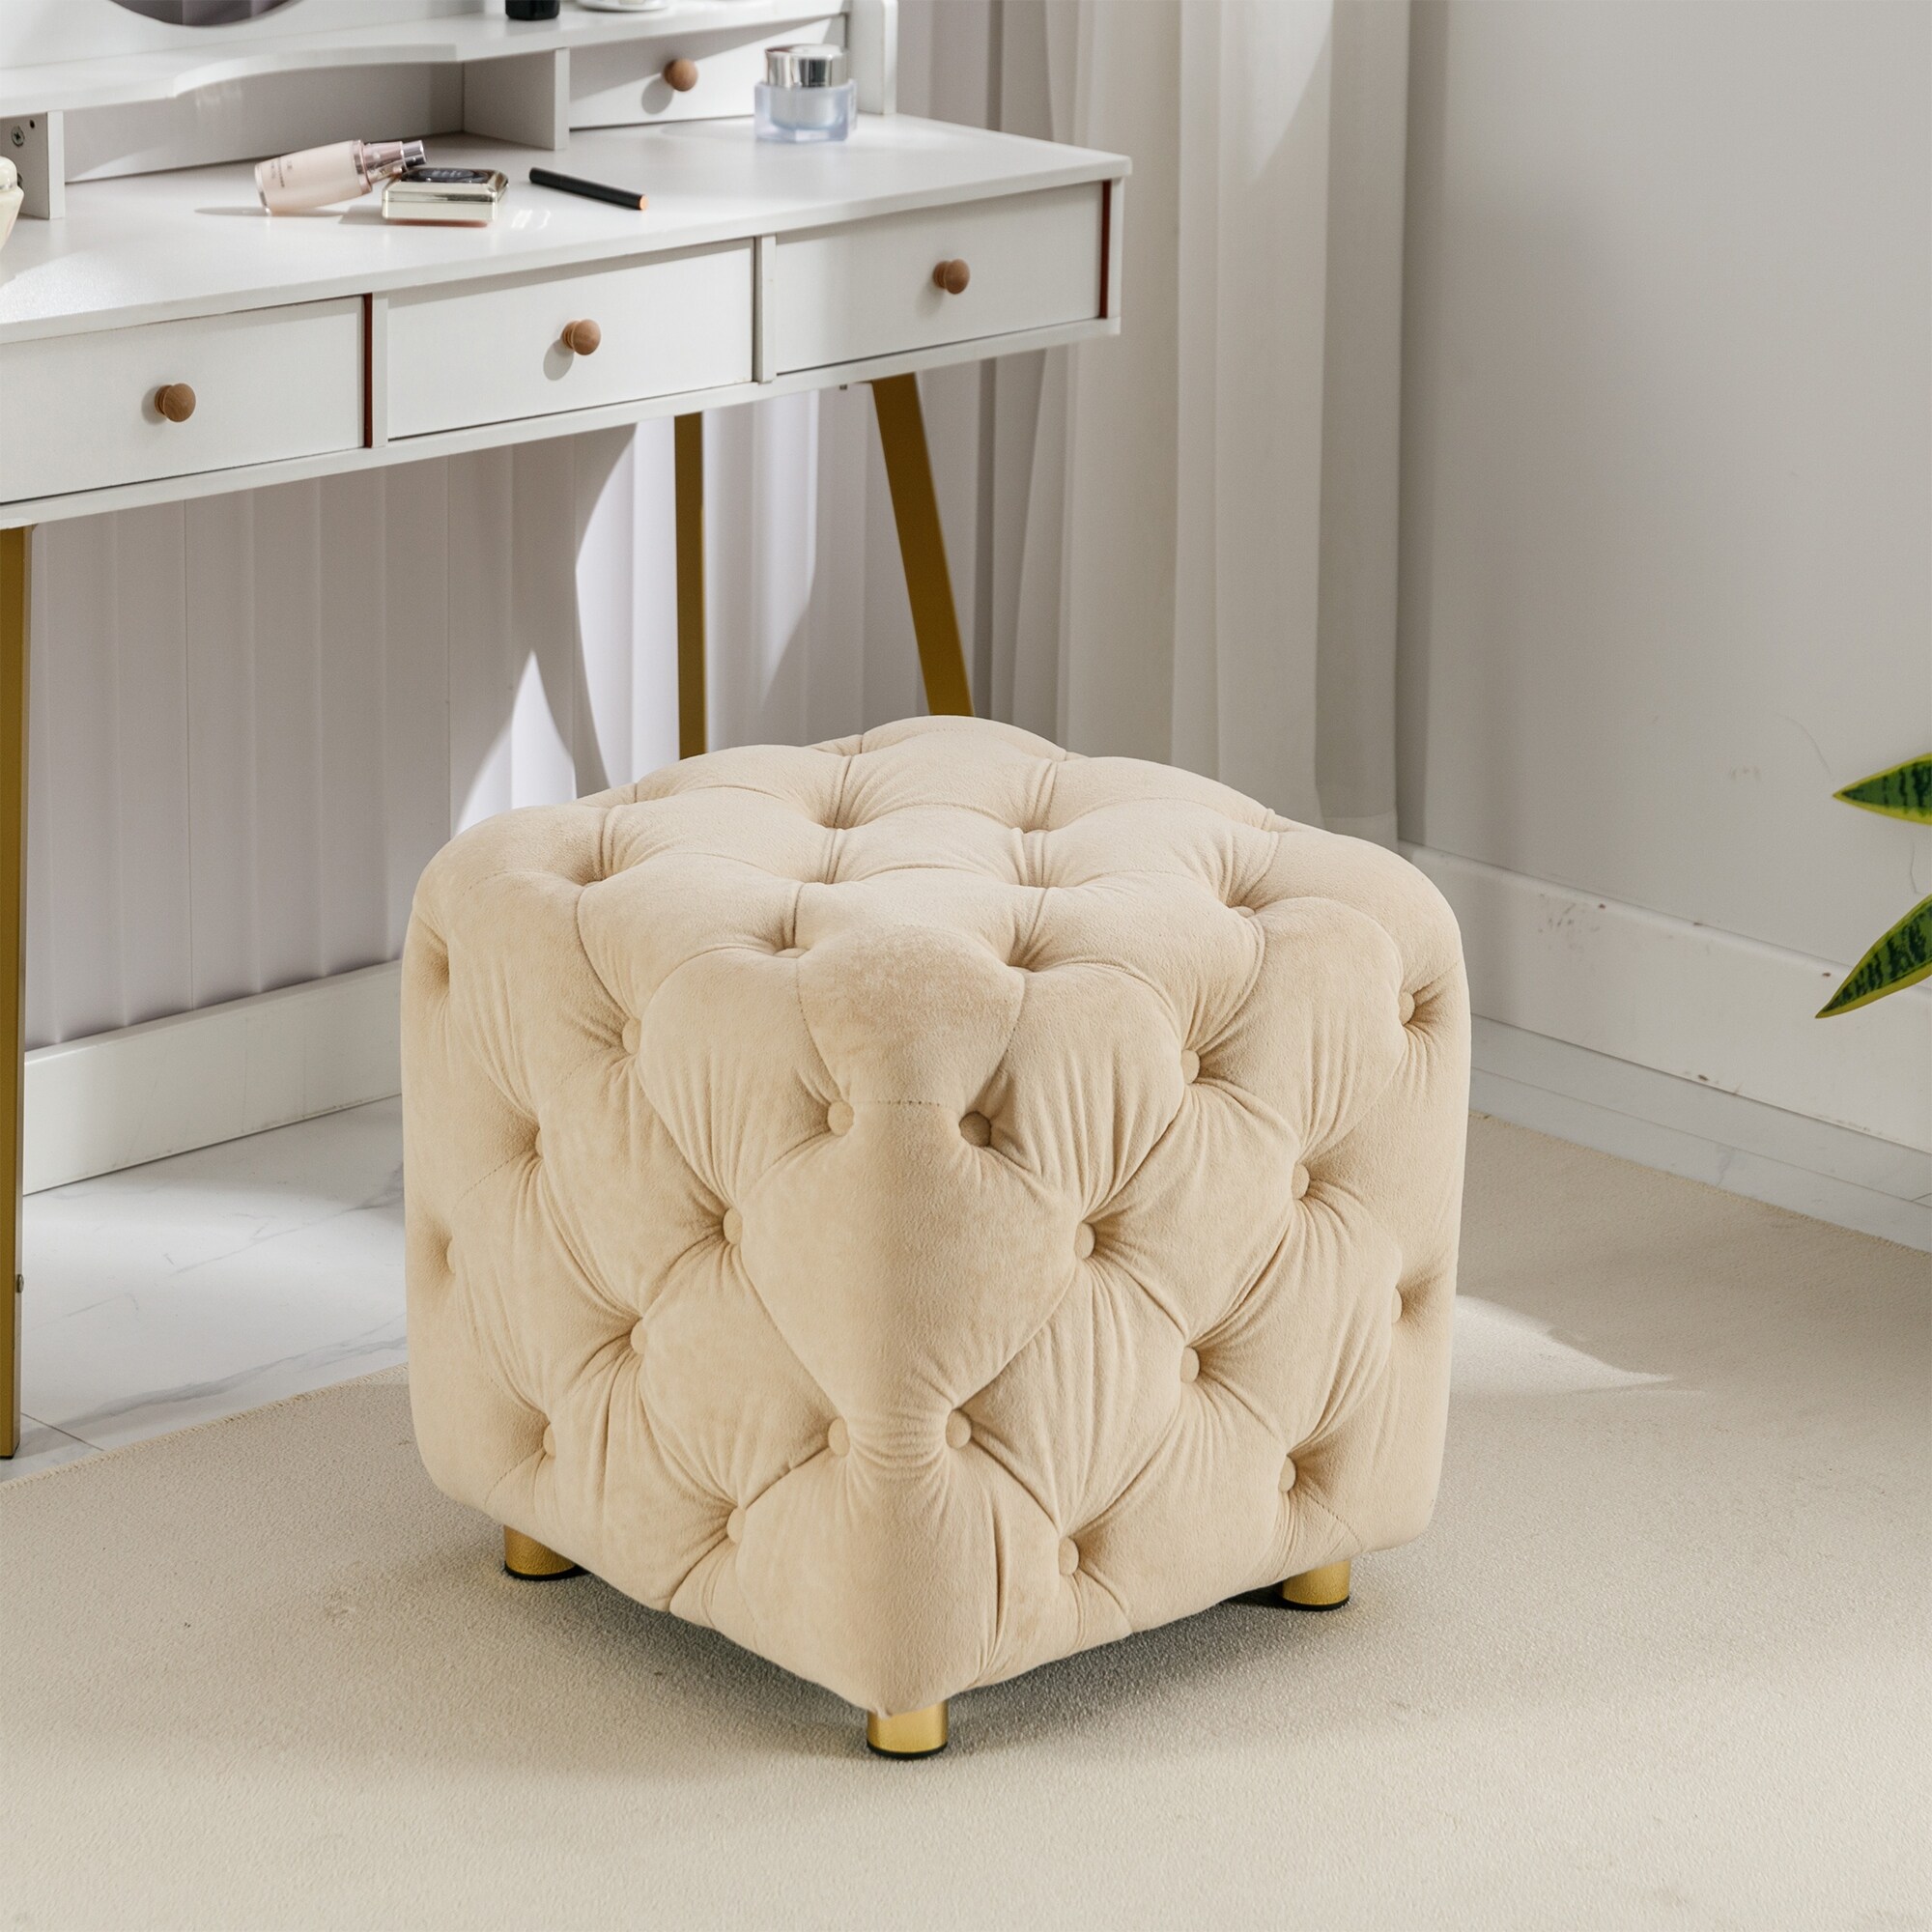 https://ak1.ostkcdn.com/images/products/is/images/direct/e9b21018949b874d21a38932cda5b0d0c5dac691/Modern-Velvet-Upholstered-Ottoman-Small-End-Table-Dressing-Makeup-Chair-Soft-Foot-Stool-for-Living-Room-Bedroom-Entryway.jpg